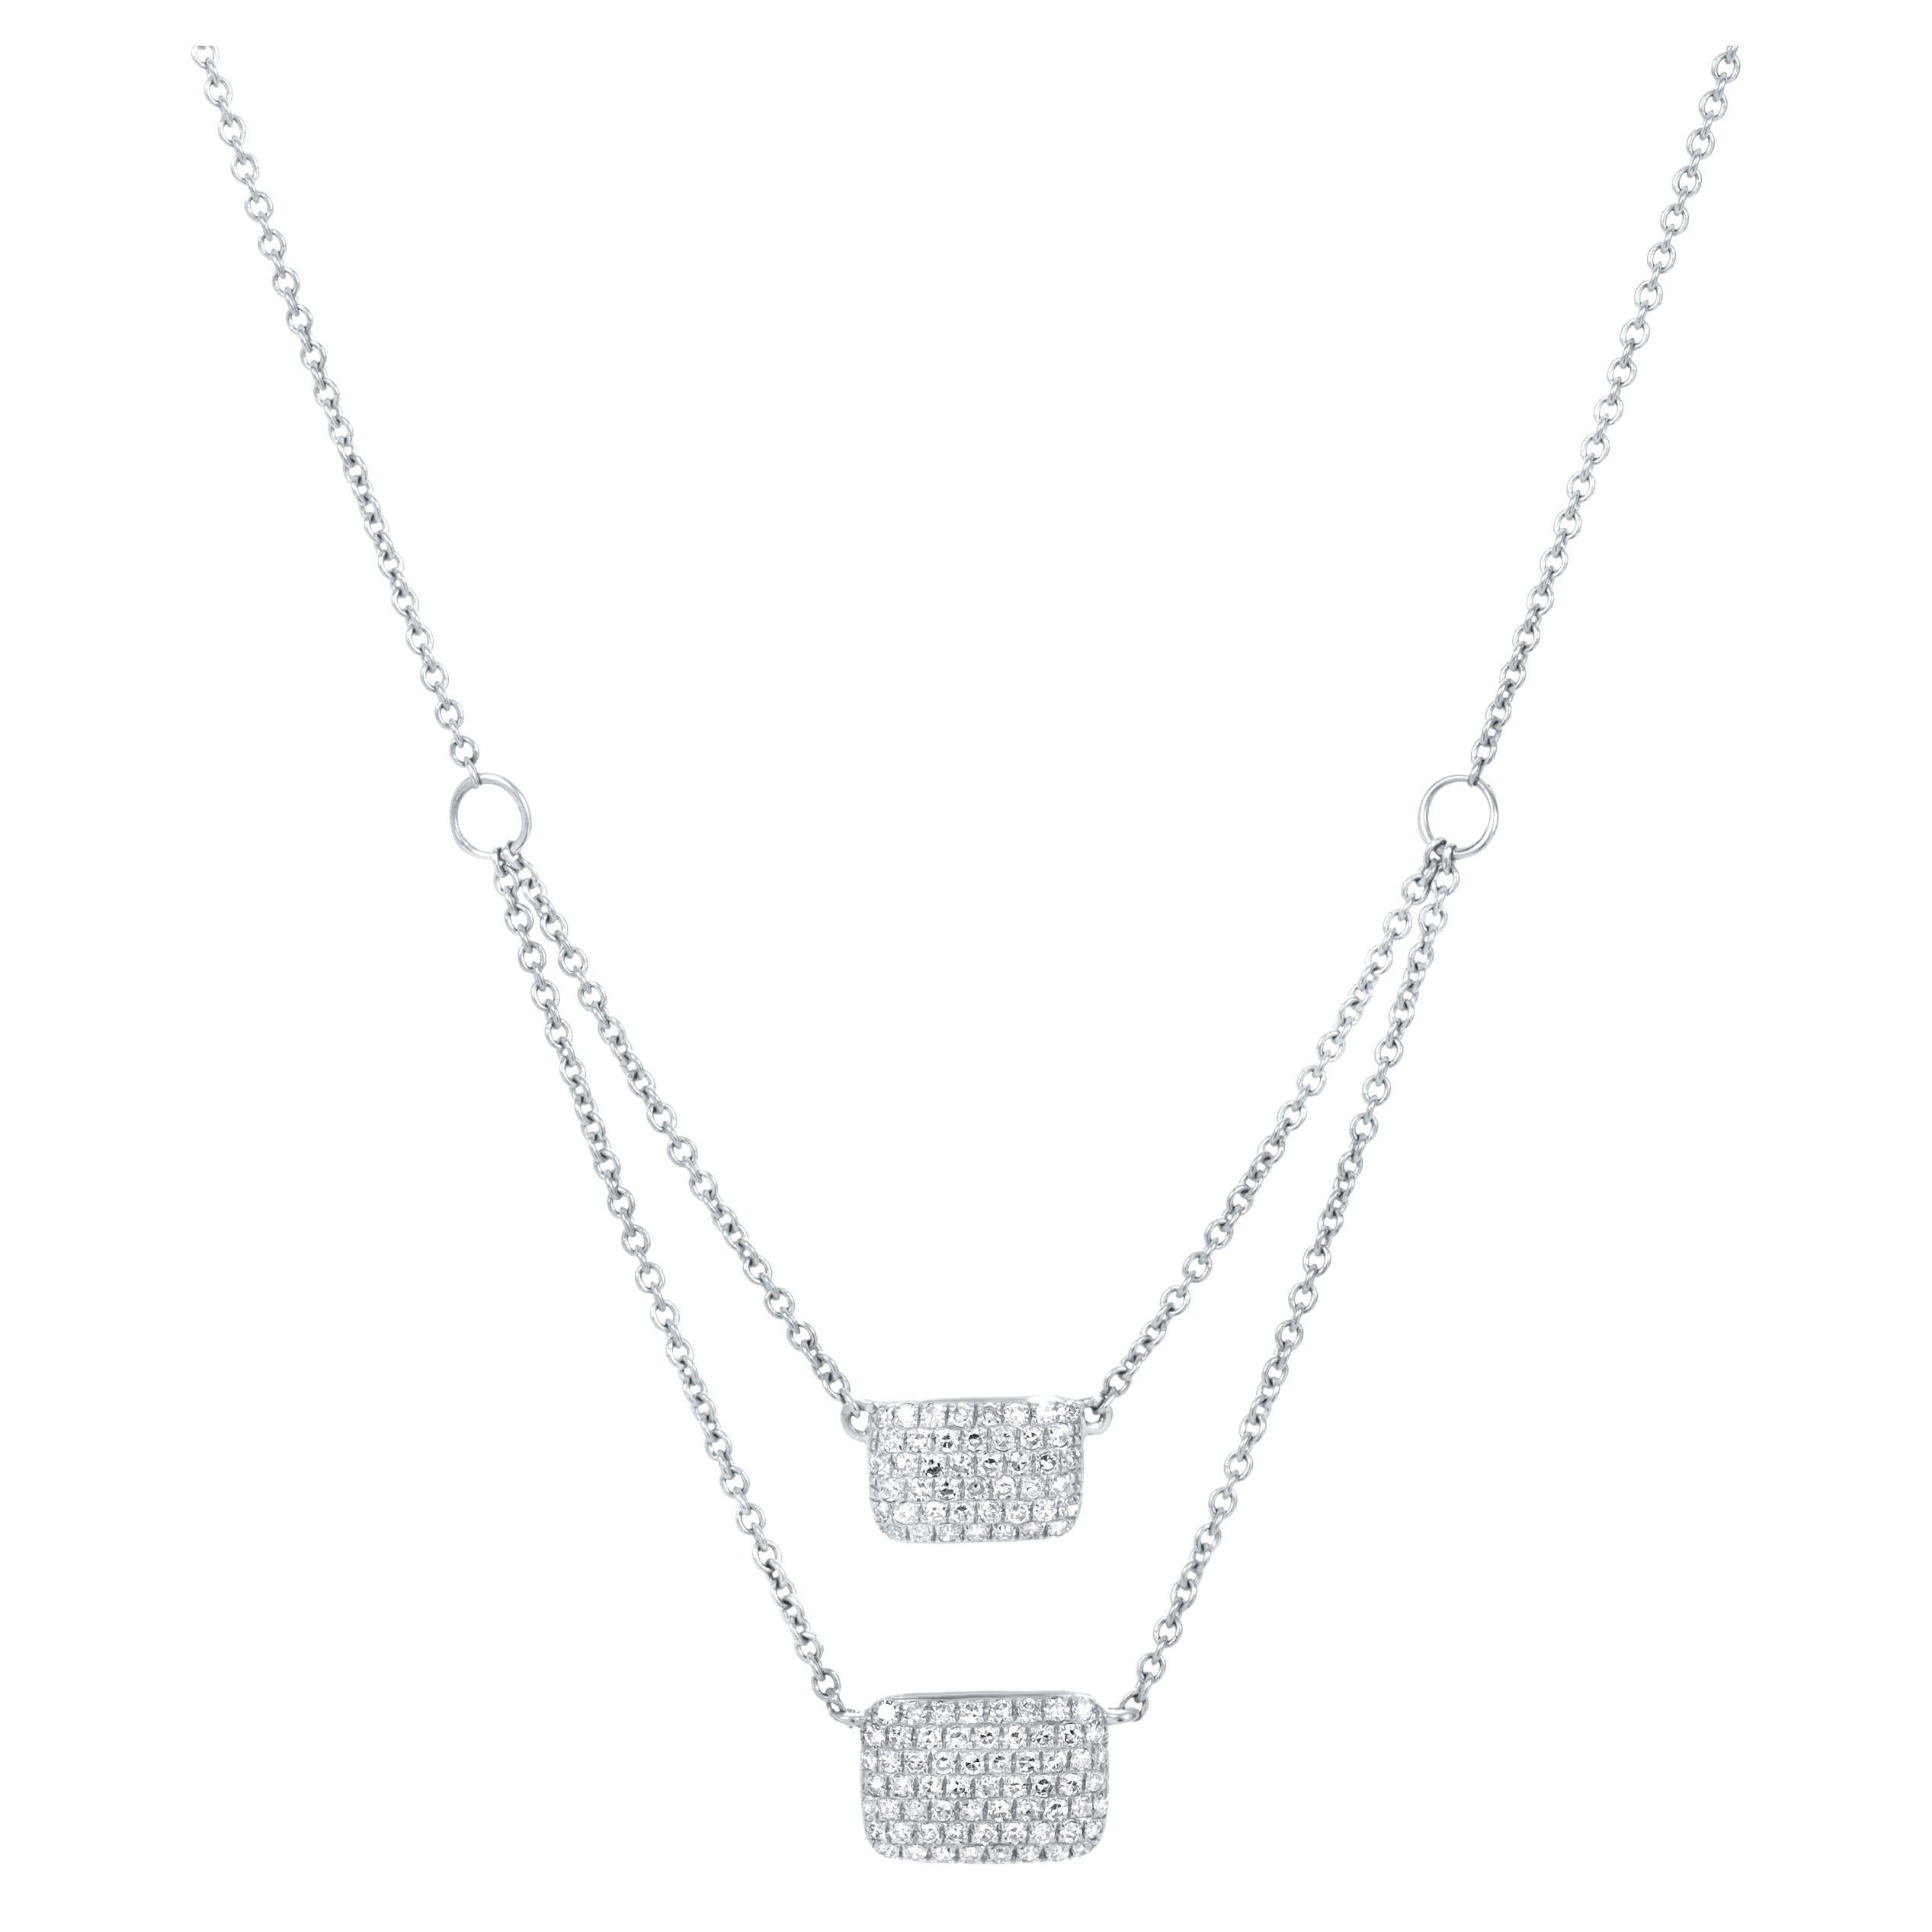 Luxle 0.29 Cttw. Double Strand Diamond Cluster Necklace in 14k White Gold For Sale